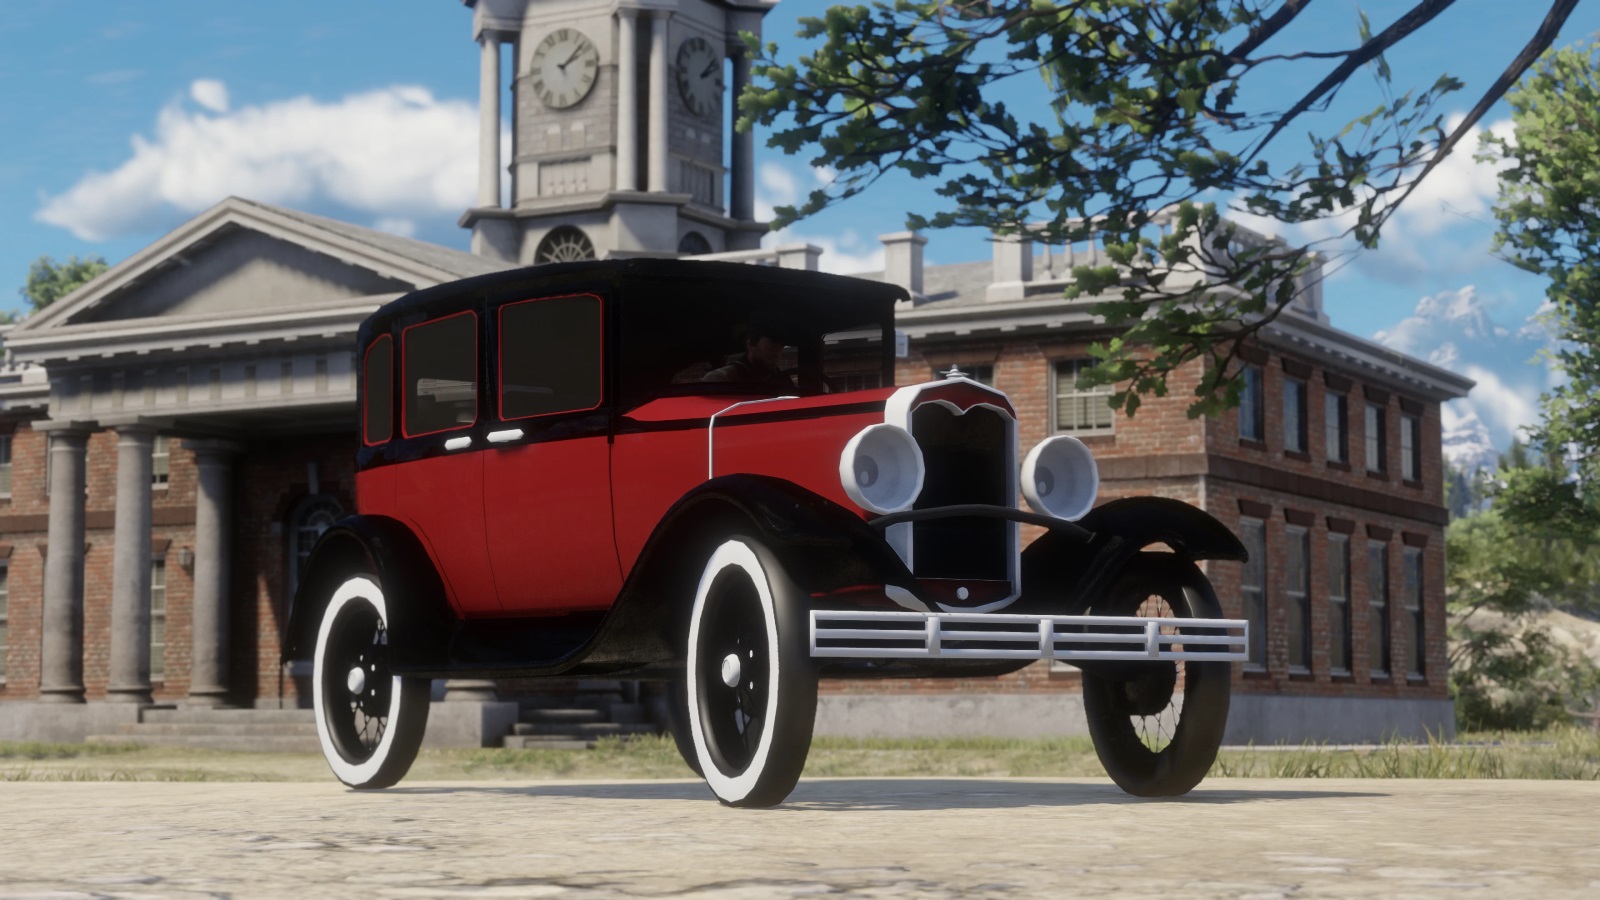 Mod adds functional car to Red Dead Redemption 2